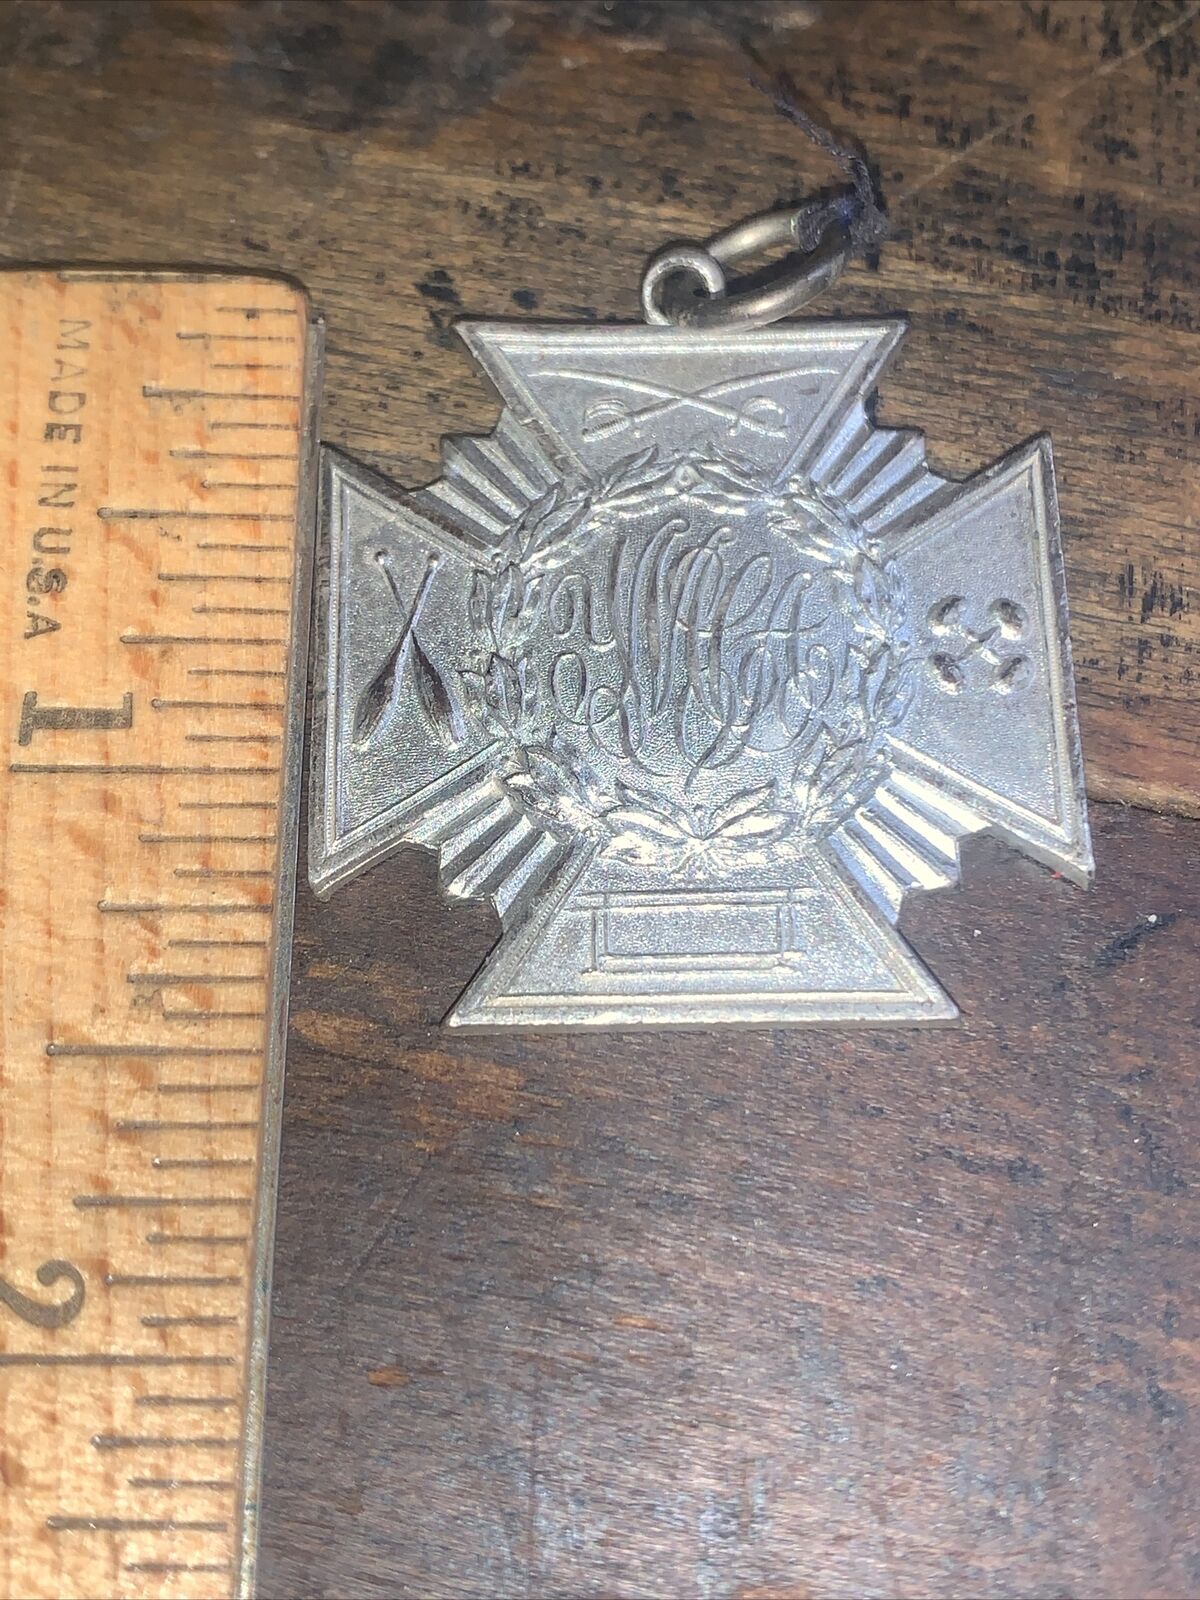 Antique Medal Award YMCA “Perfect Attendance” ￼for 1901-1902 Providence Gym.